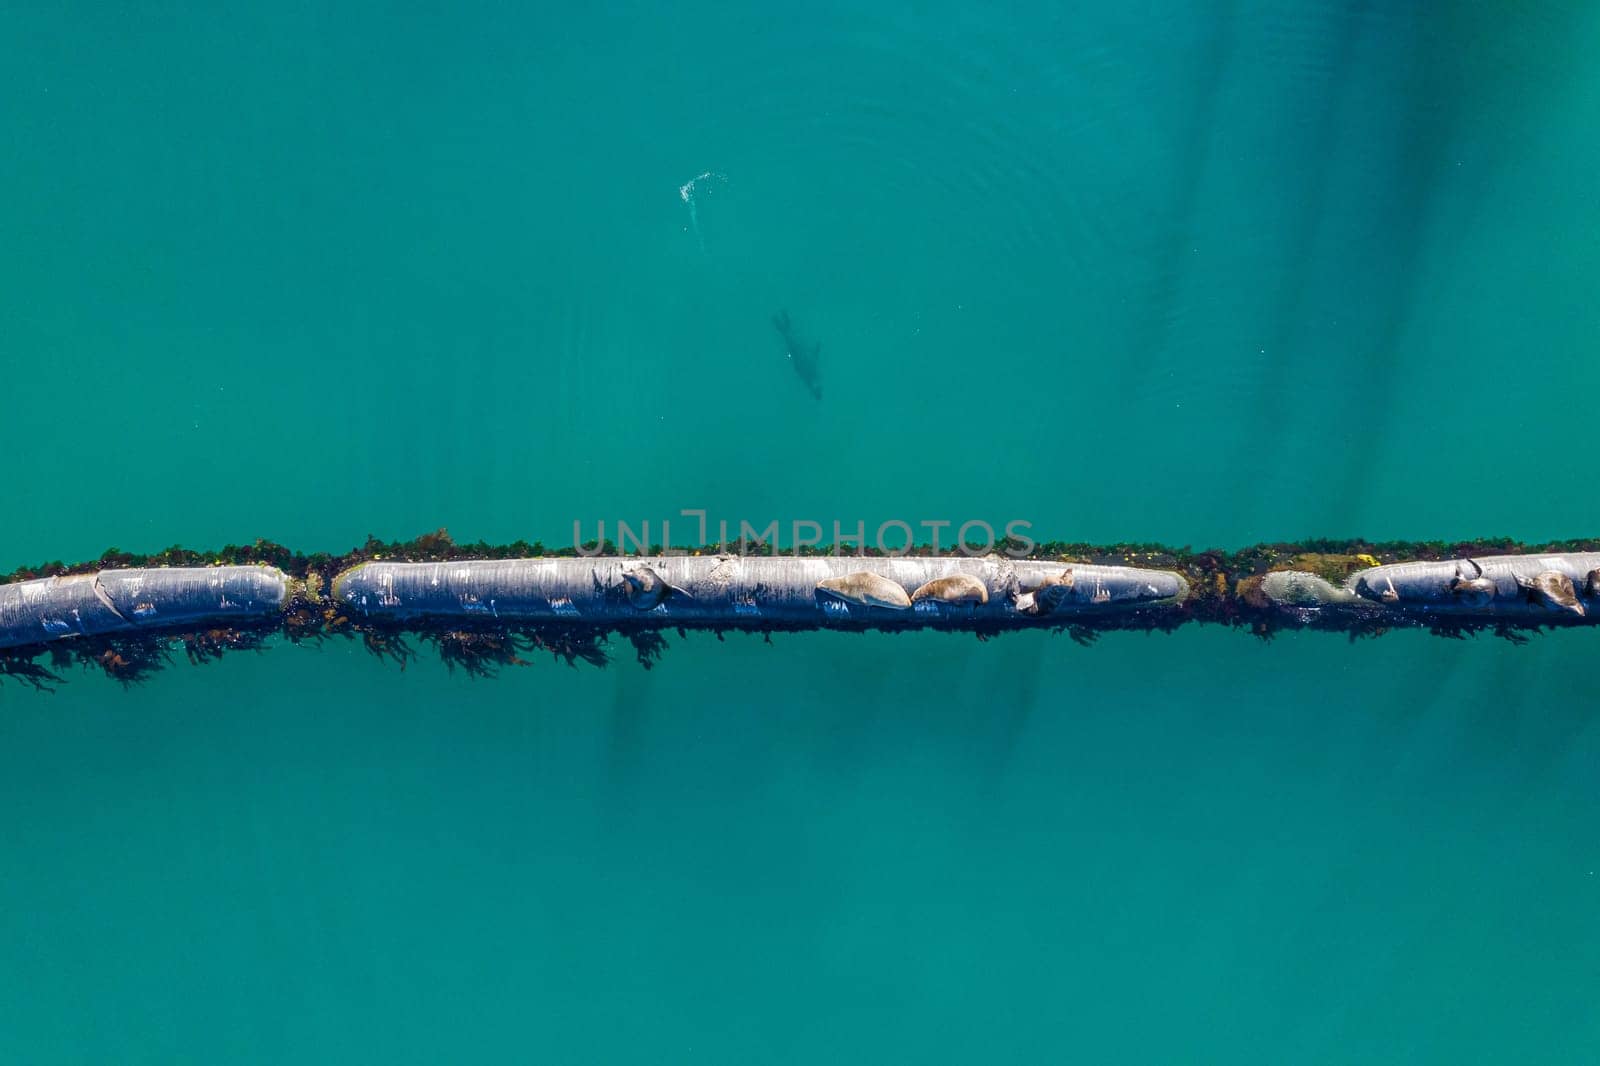 Aerial, marine and pipeline in ocean or sea, animals and seals on export pipe for fuel or gas transportation. Industrial, water and corrosion resistant steel, offshore or environmental impacts by YuriArcurs